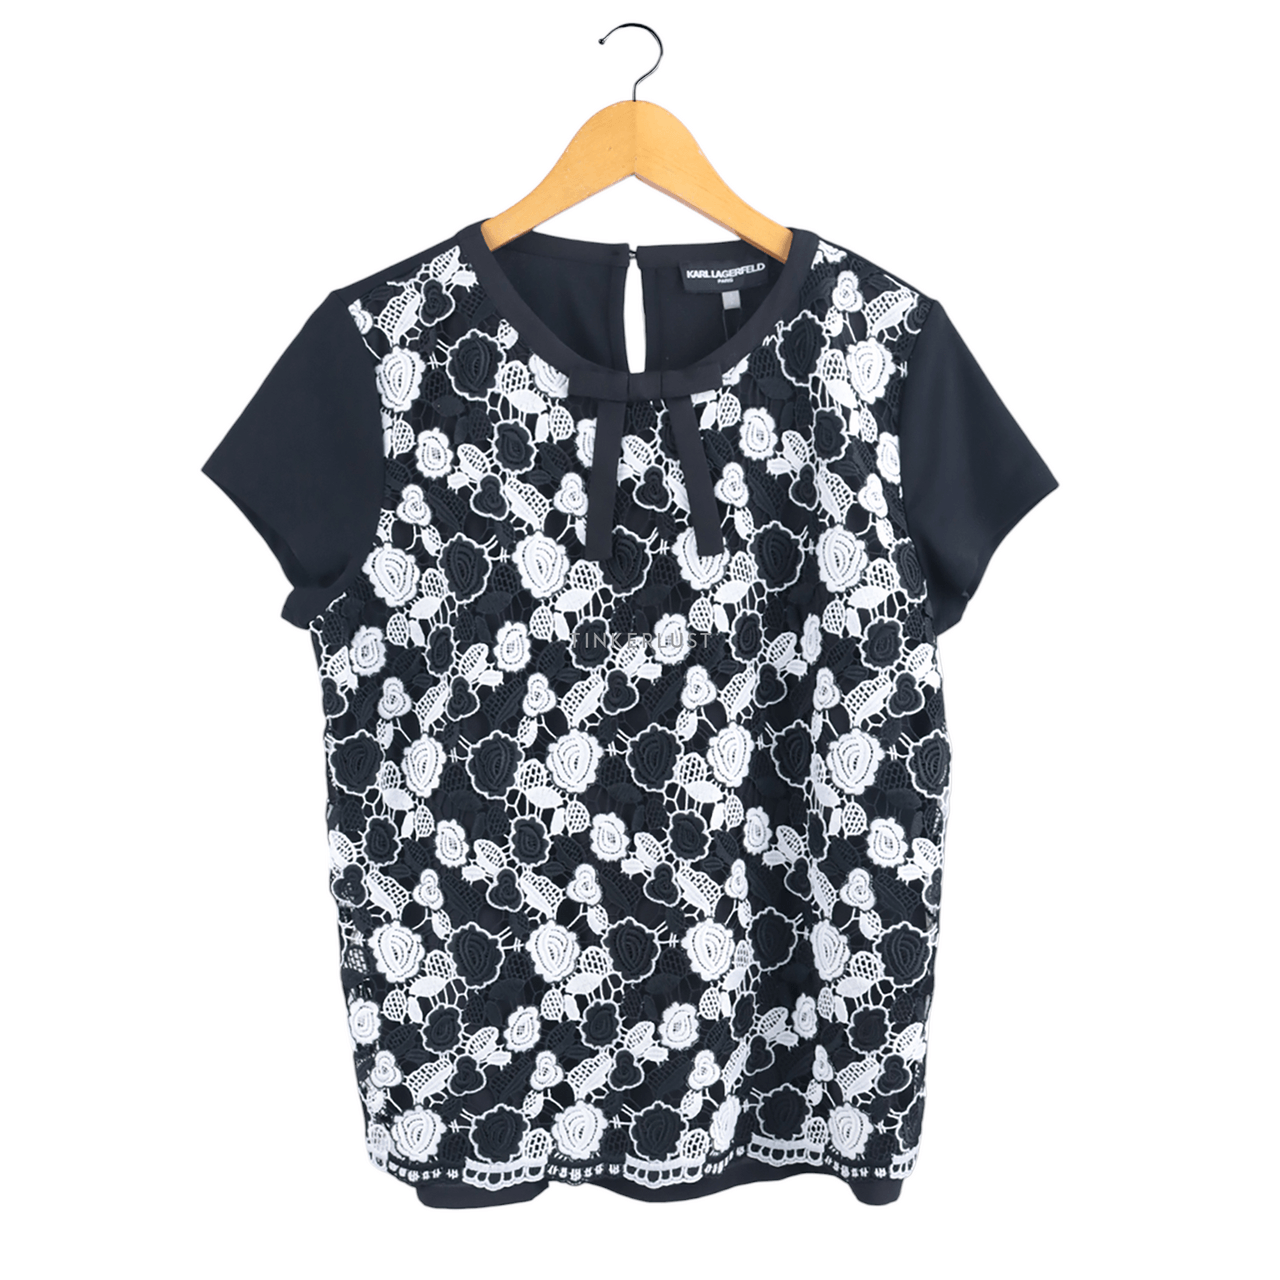 Karl Lagerfeld Floral Embroidered Black Blouse